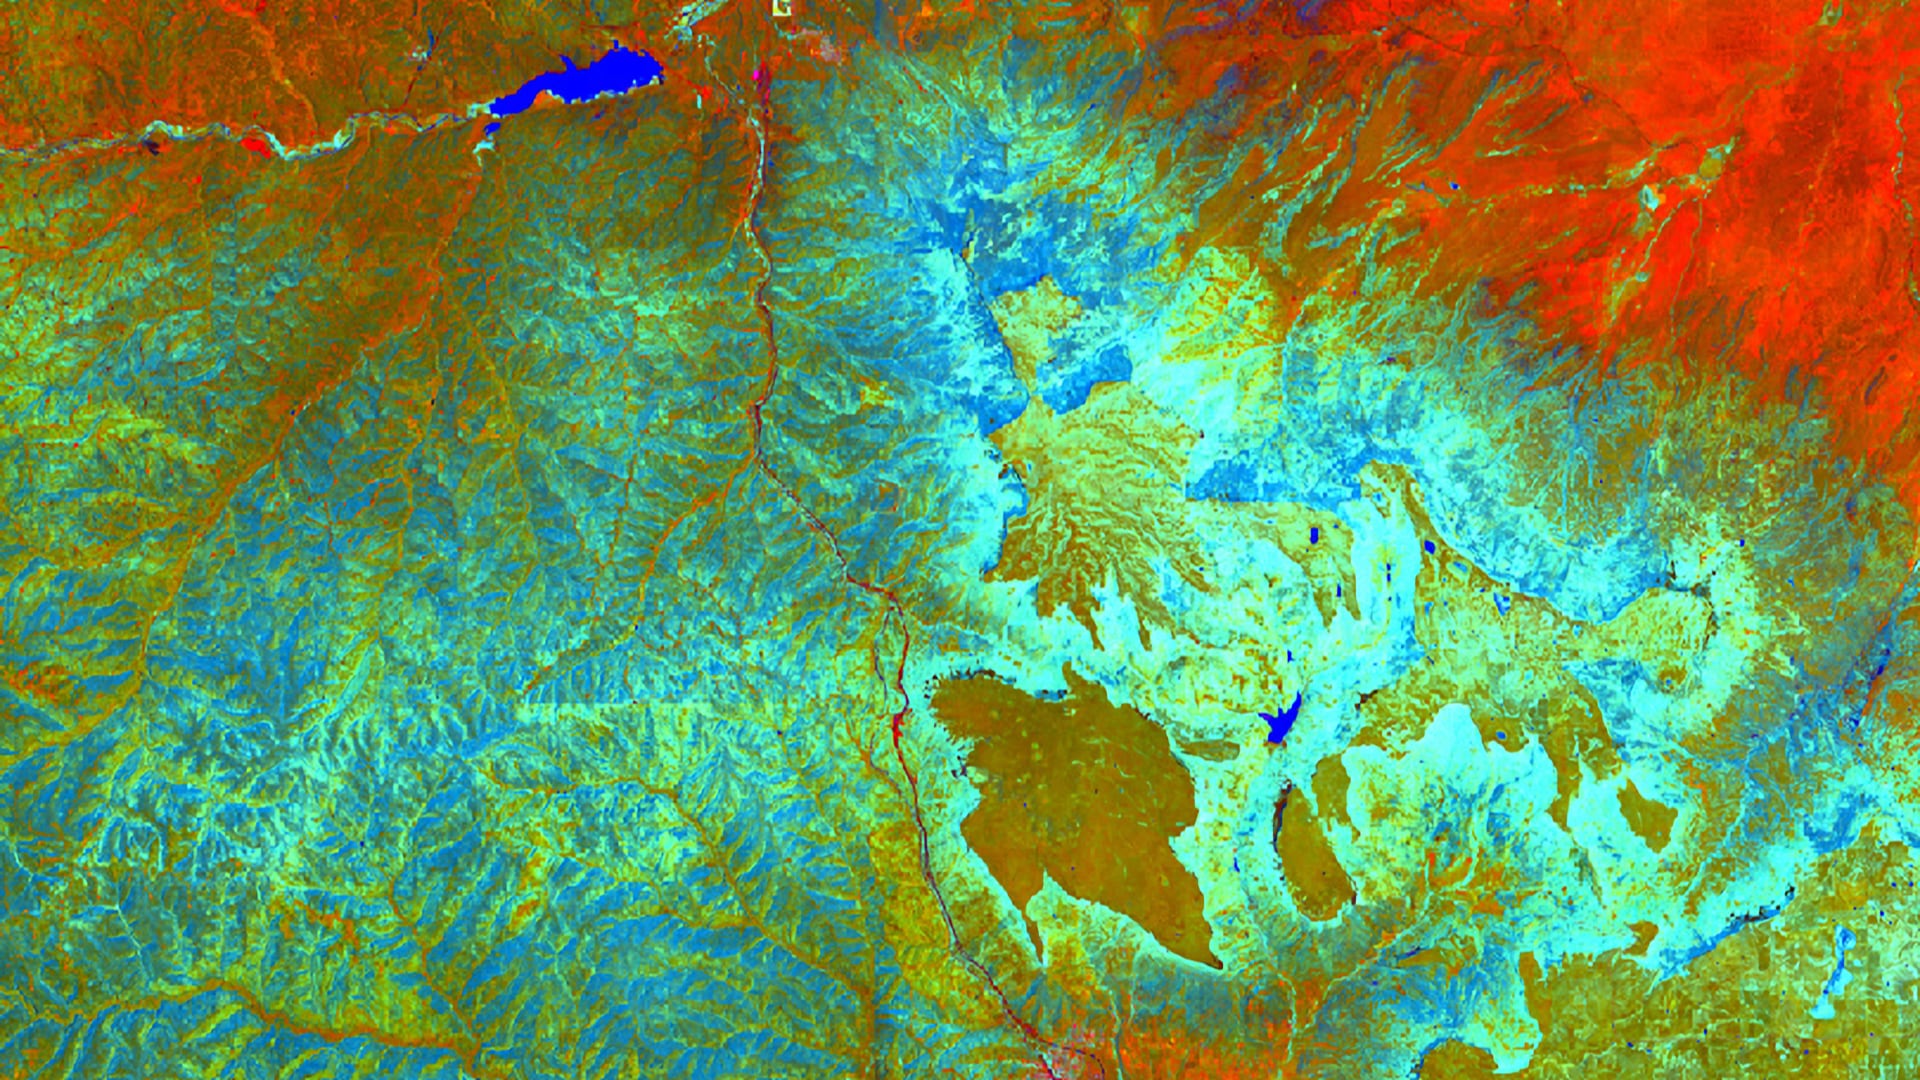 Composite of the area around Fisher's Peak State Park made of the Tasseled Cap coefficients Brightness, Greenness, and Wetness. Coefficients were calculated from a single Landsat 8 OLI TOA image from July 9, 2019. The red, green, and blue bands align with Brightness, Greenness, and Wetness, respectively, to showcase vegetation health and density. Greenness and Wetness are good indicators of biomass, and areas of lush vegetation can be seen in turquoise.   Keywords: Colorado, Landsat, Tasseled Cap, Biomass​